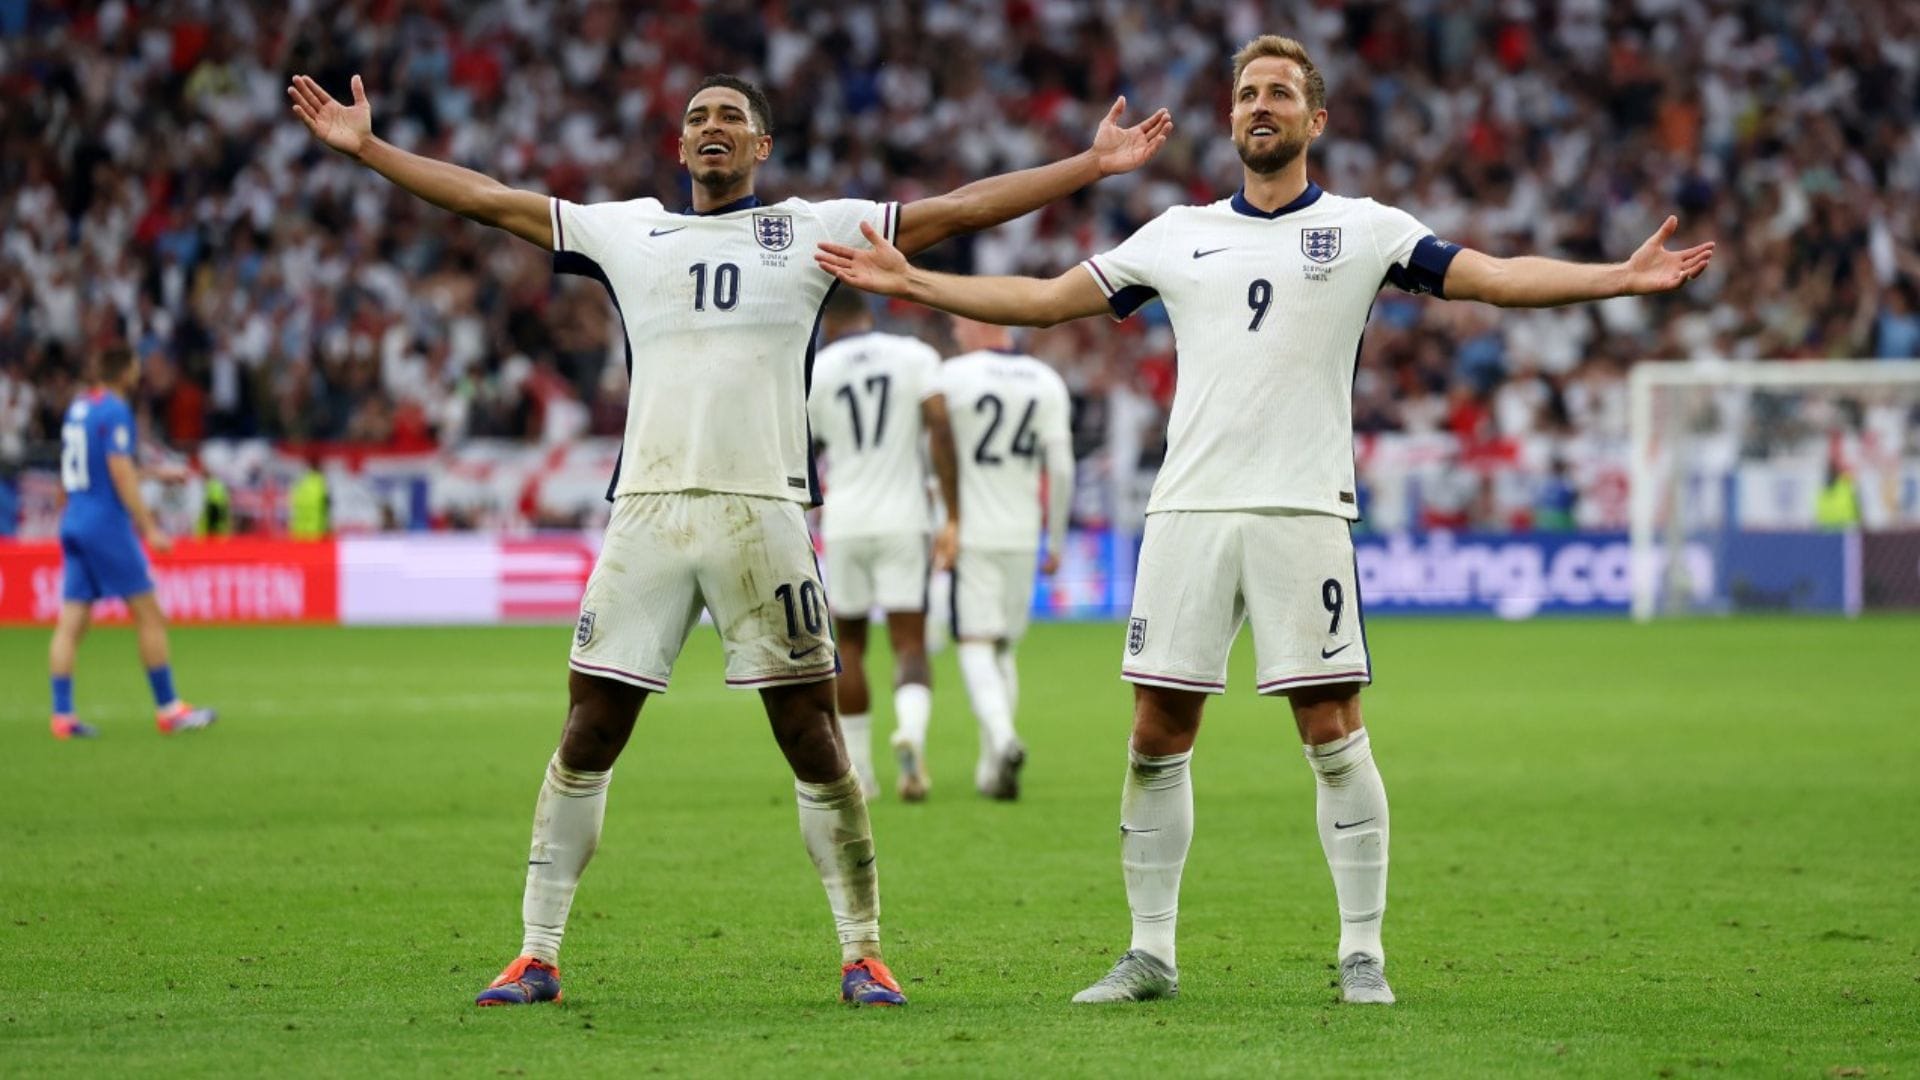 England 2-1 Slovakia LIVE RESULT - Euro 2024: Three Lions into last 8 as Bellingham and Kane lead dramatic turnaround